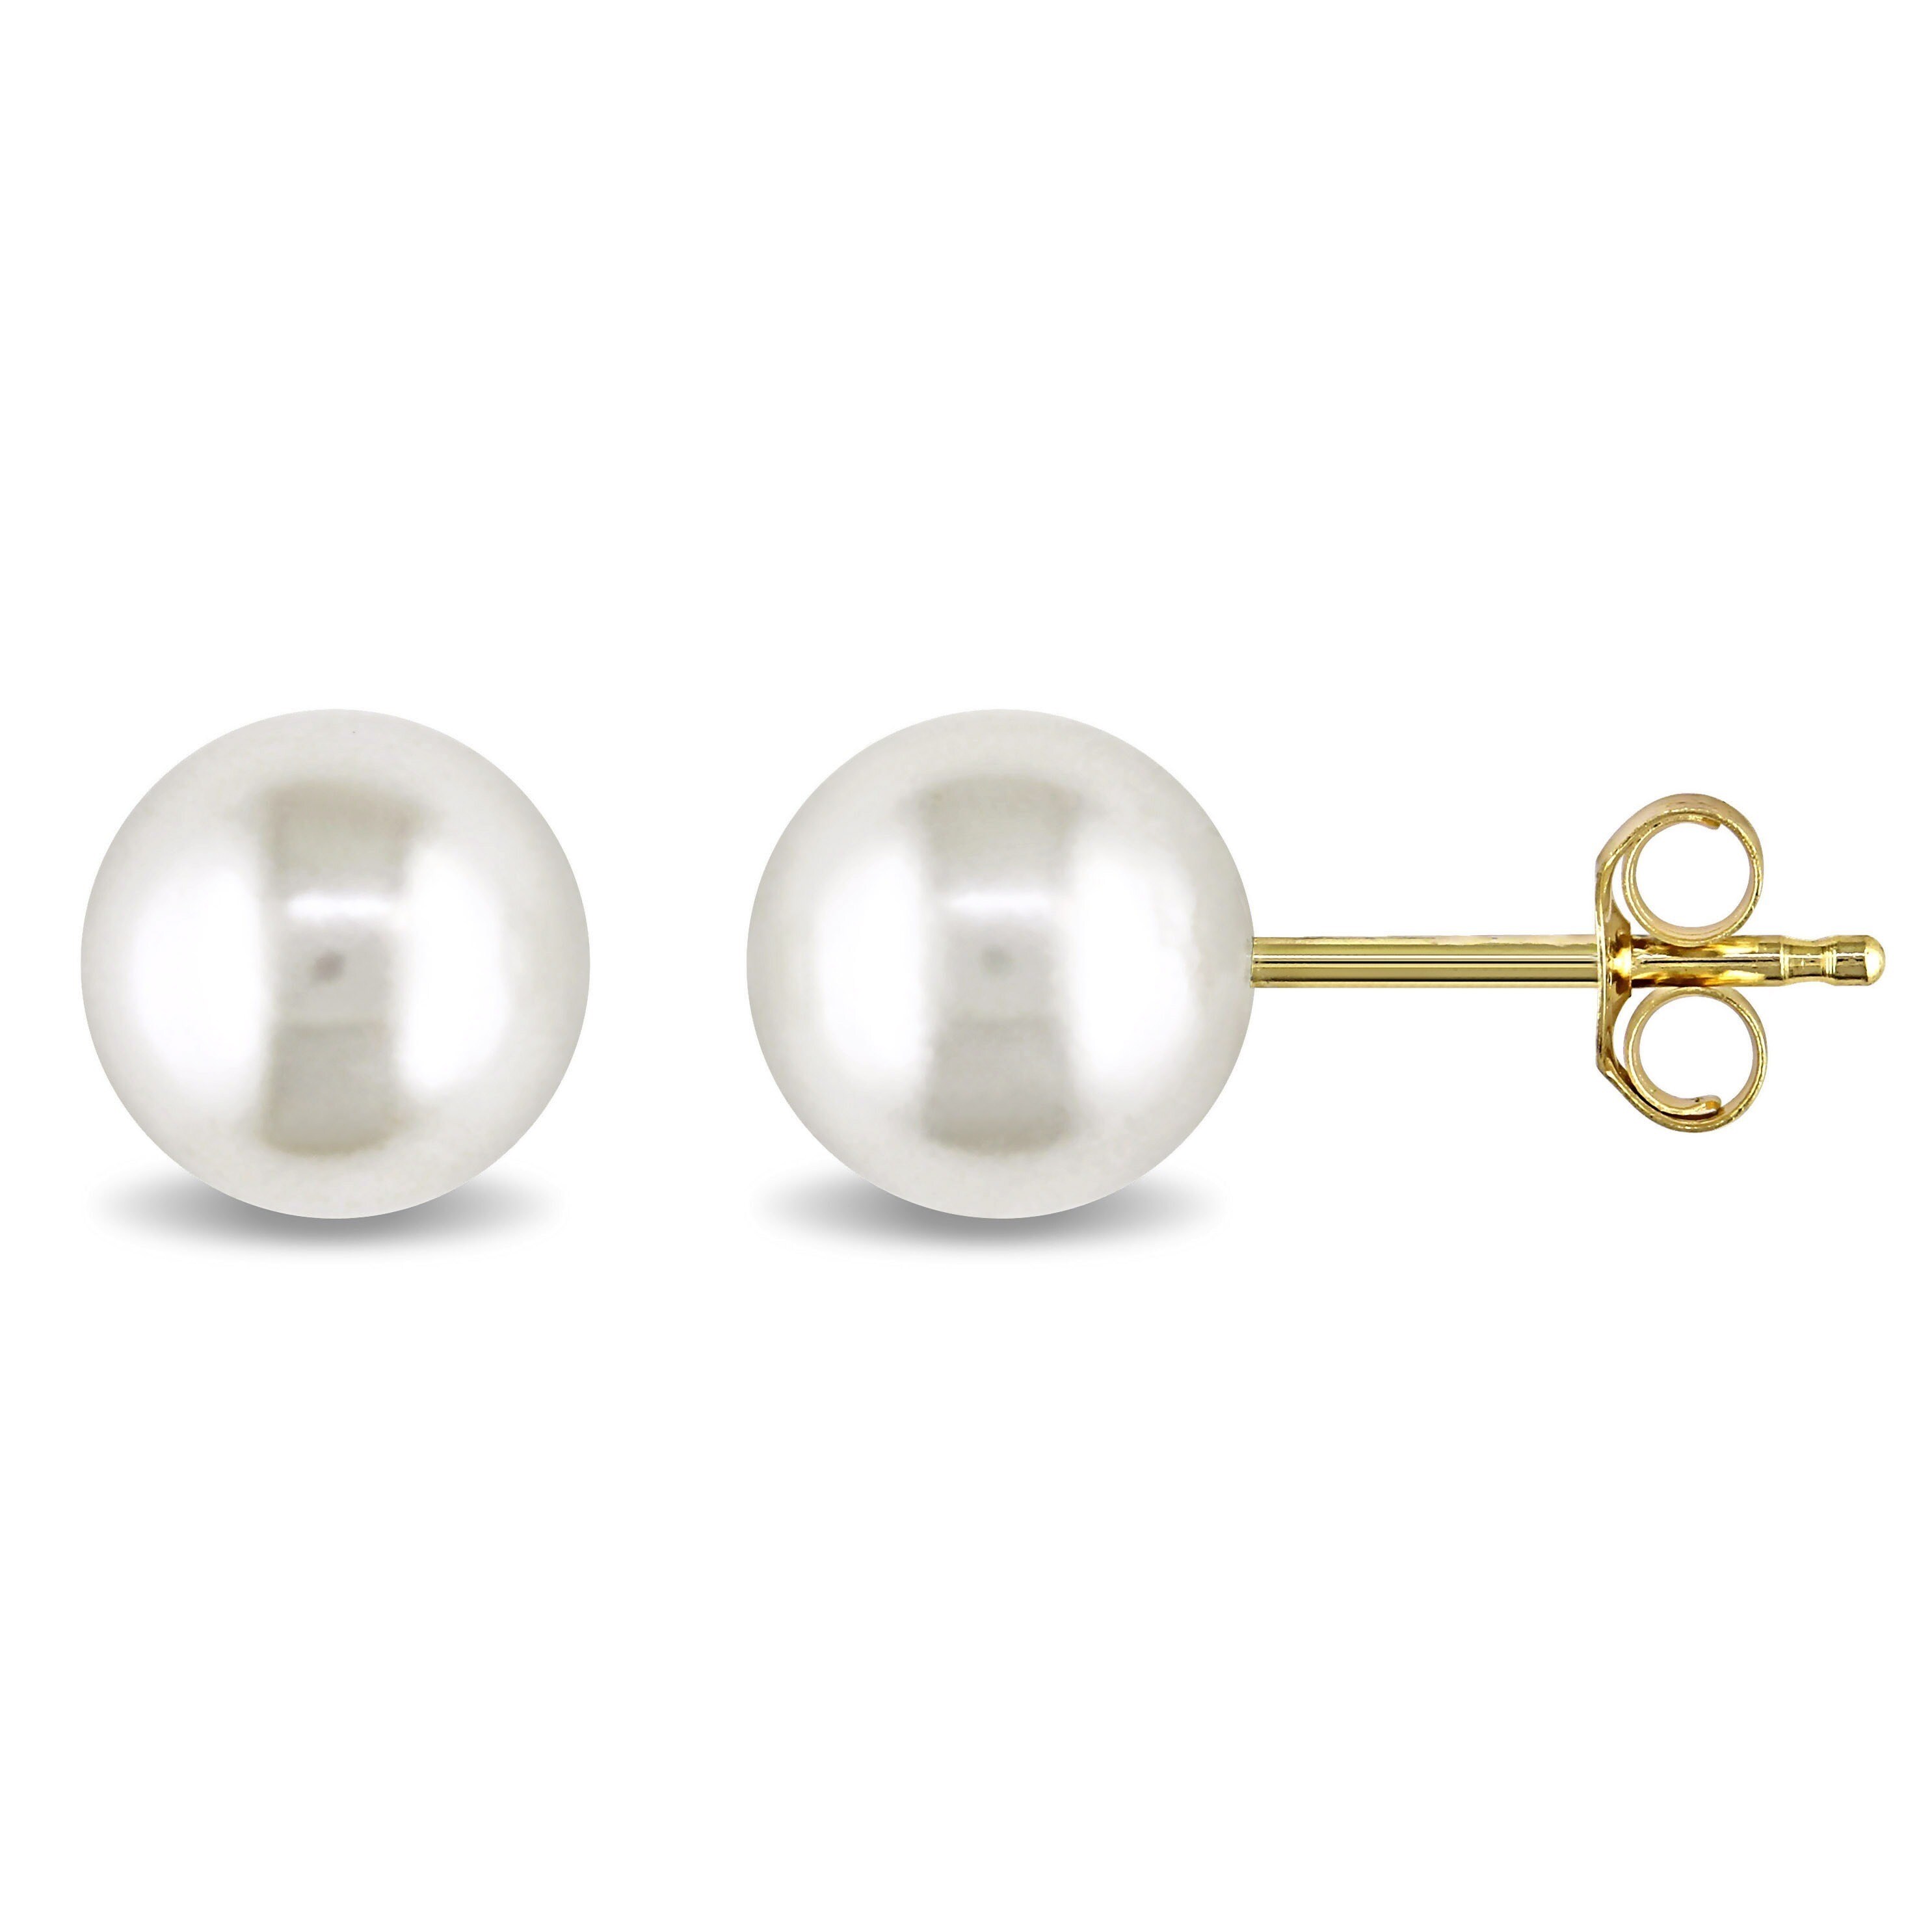 Miadora 10k Yellow Gold Cultured White Pearl Stud Earrings (6 6.5 mm)